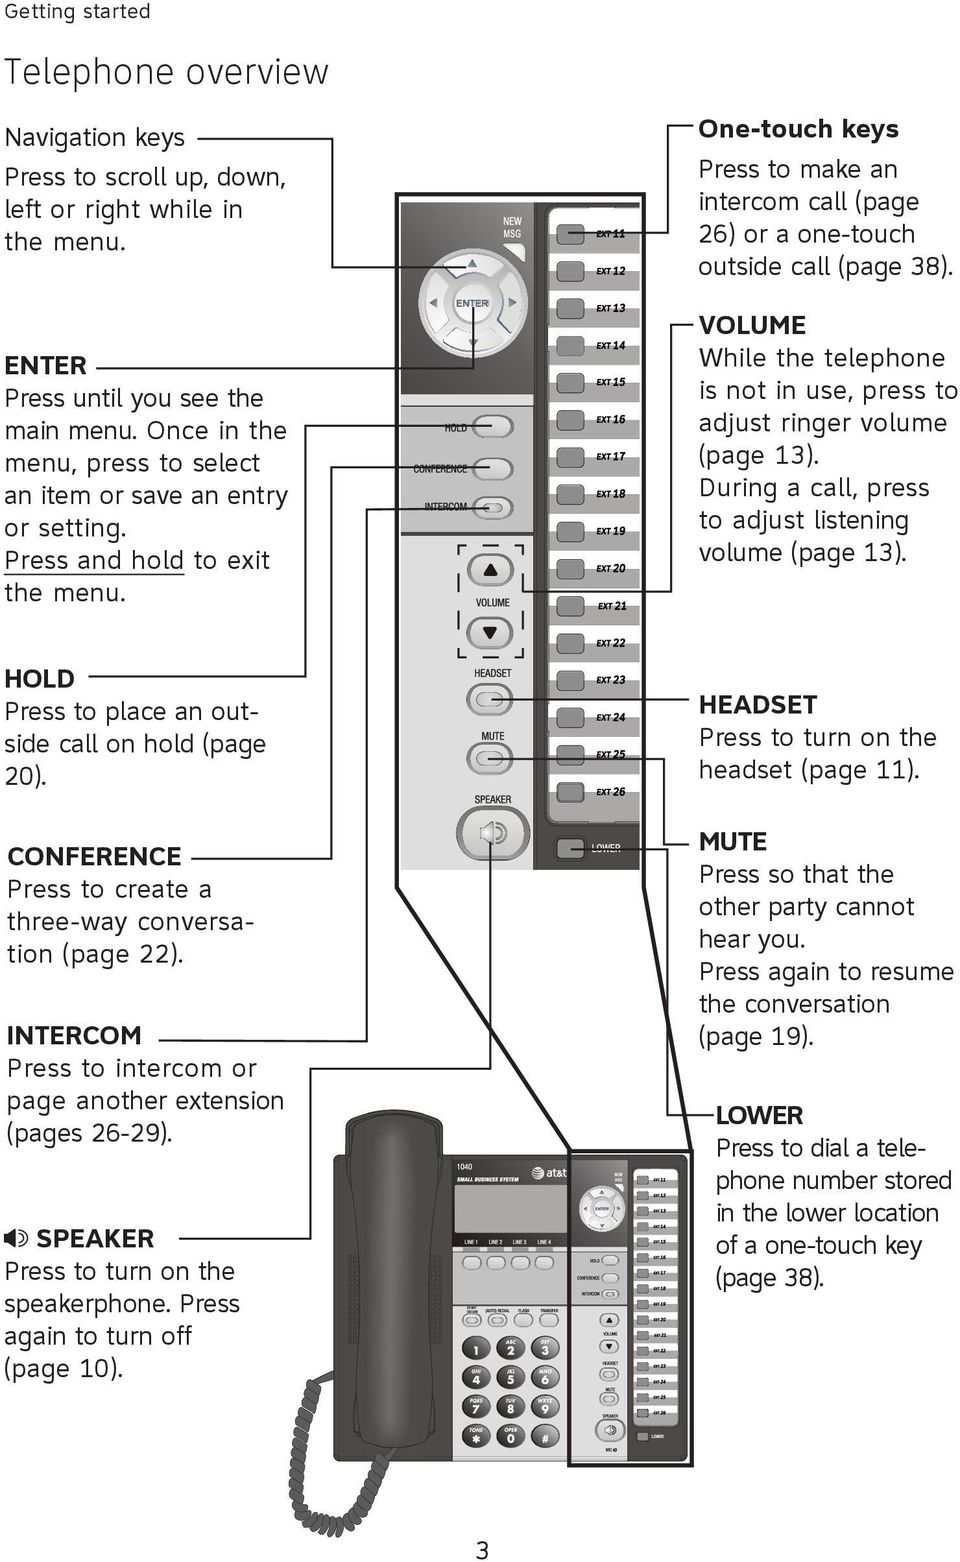 VOLUME While the telephone is not in use, press to adjust ringer volume (page 13). During a call, press to adjust listening volume (page 13). HOLD Press to place an outside call on hold (page 20).